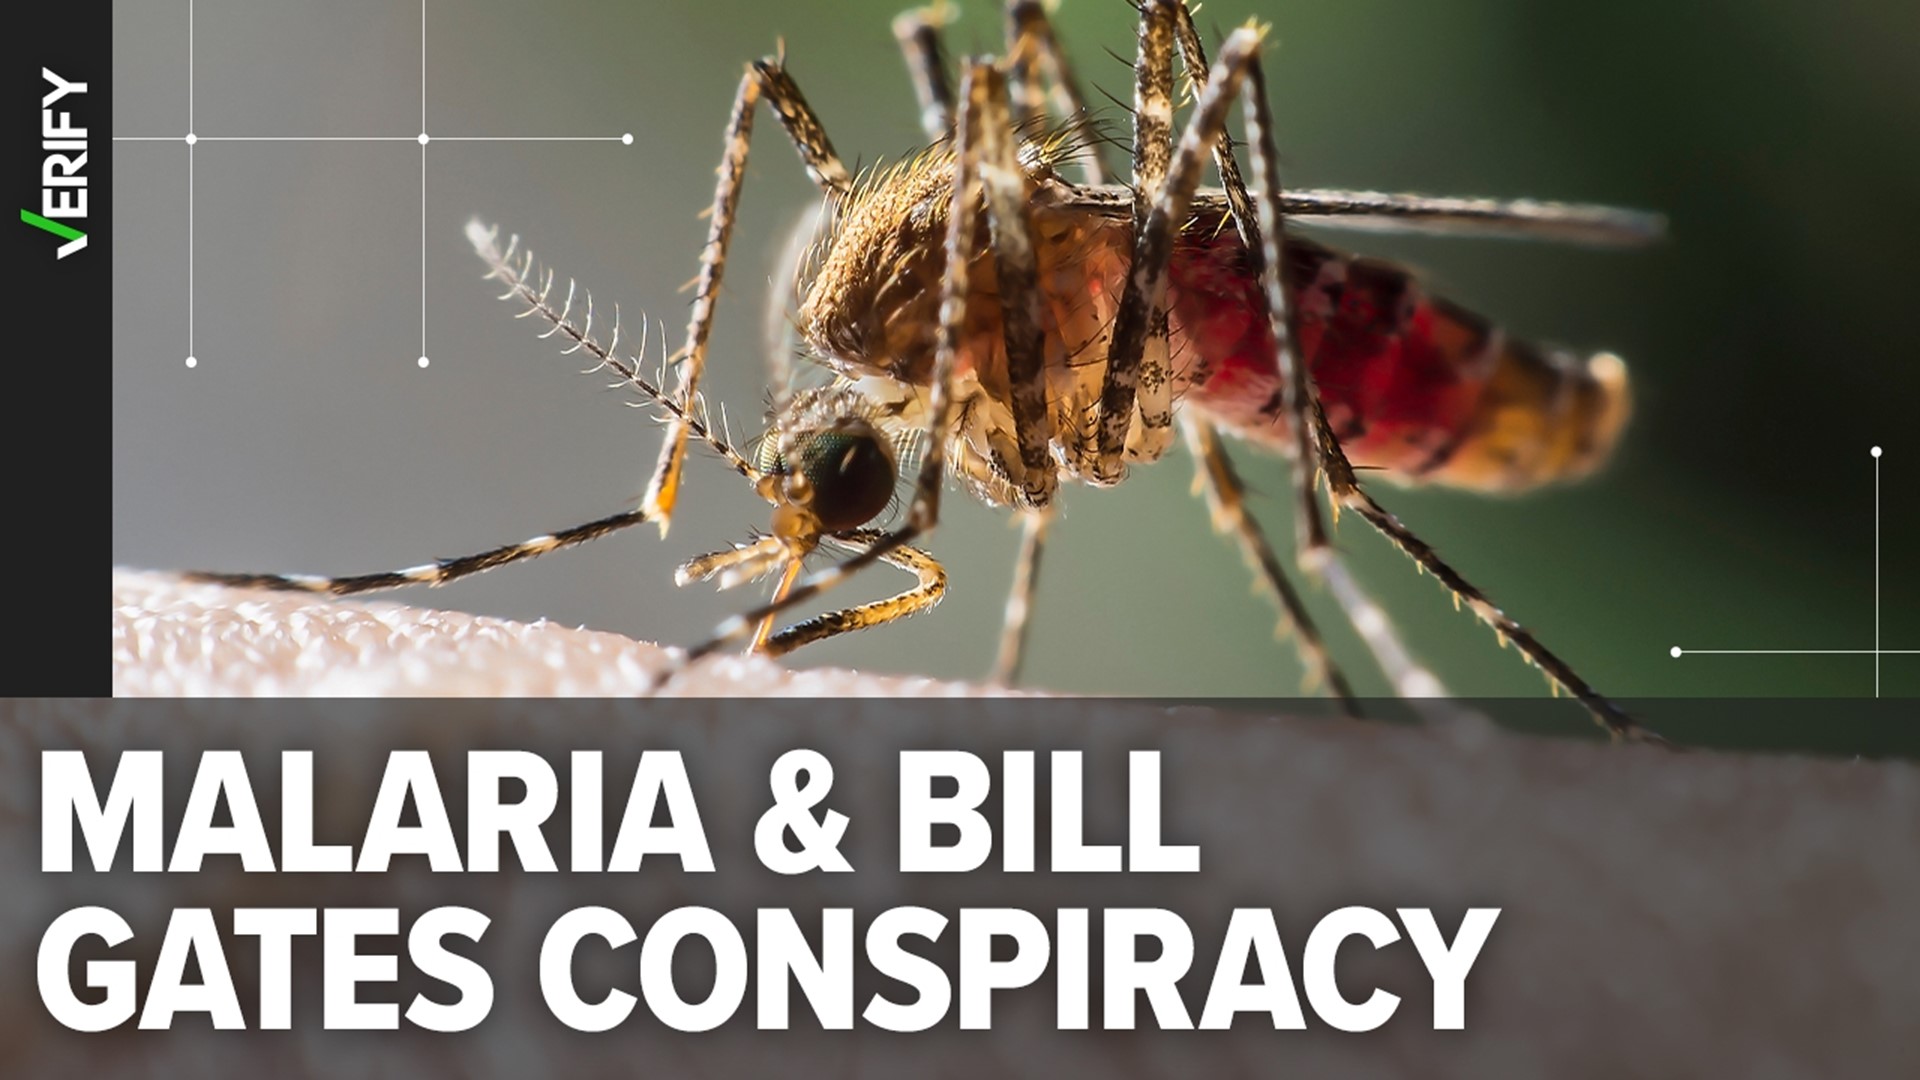 The Bill & Melinda Gates Foundation and the Florida Keys Oxitec Mosquito Project are not responsible for recent malaria cases detected in Florida and Texas.